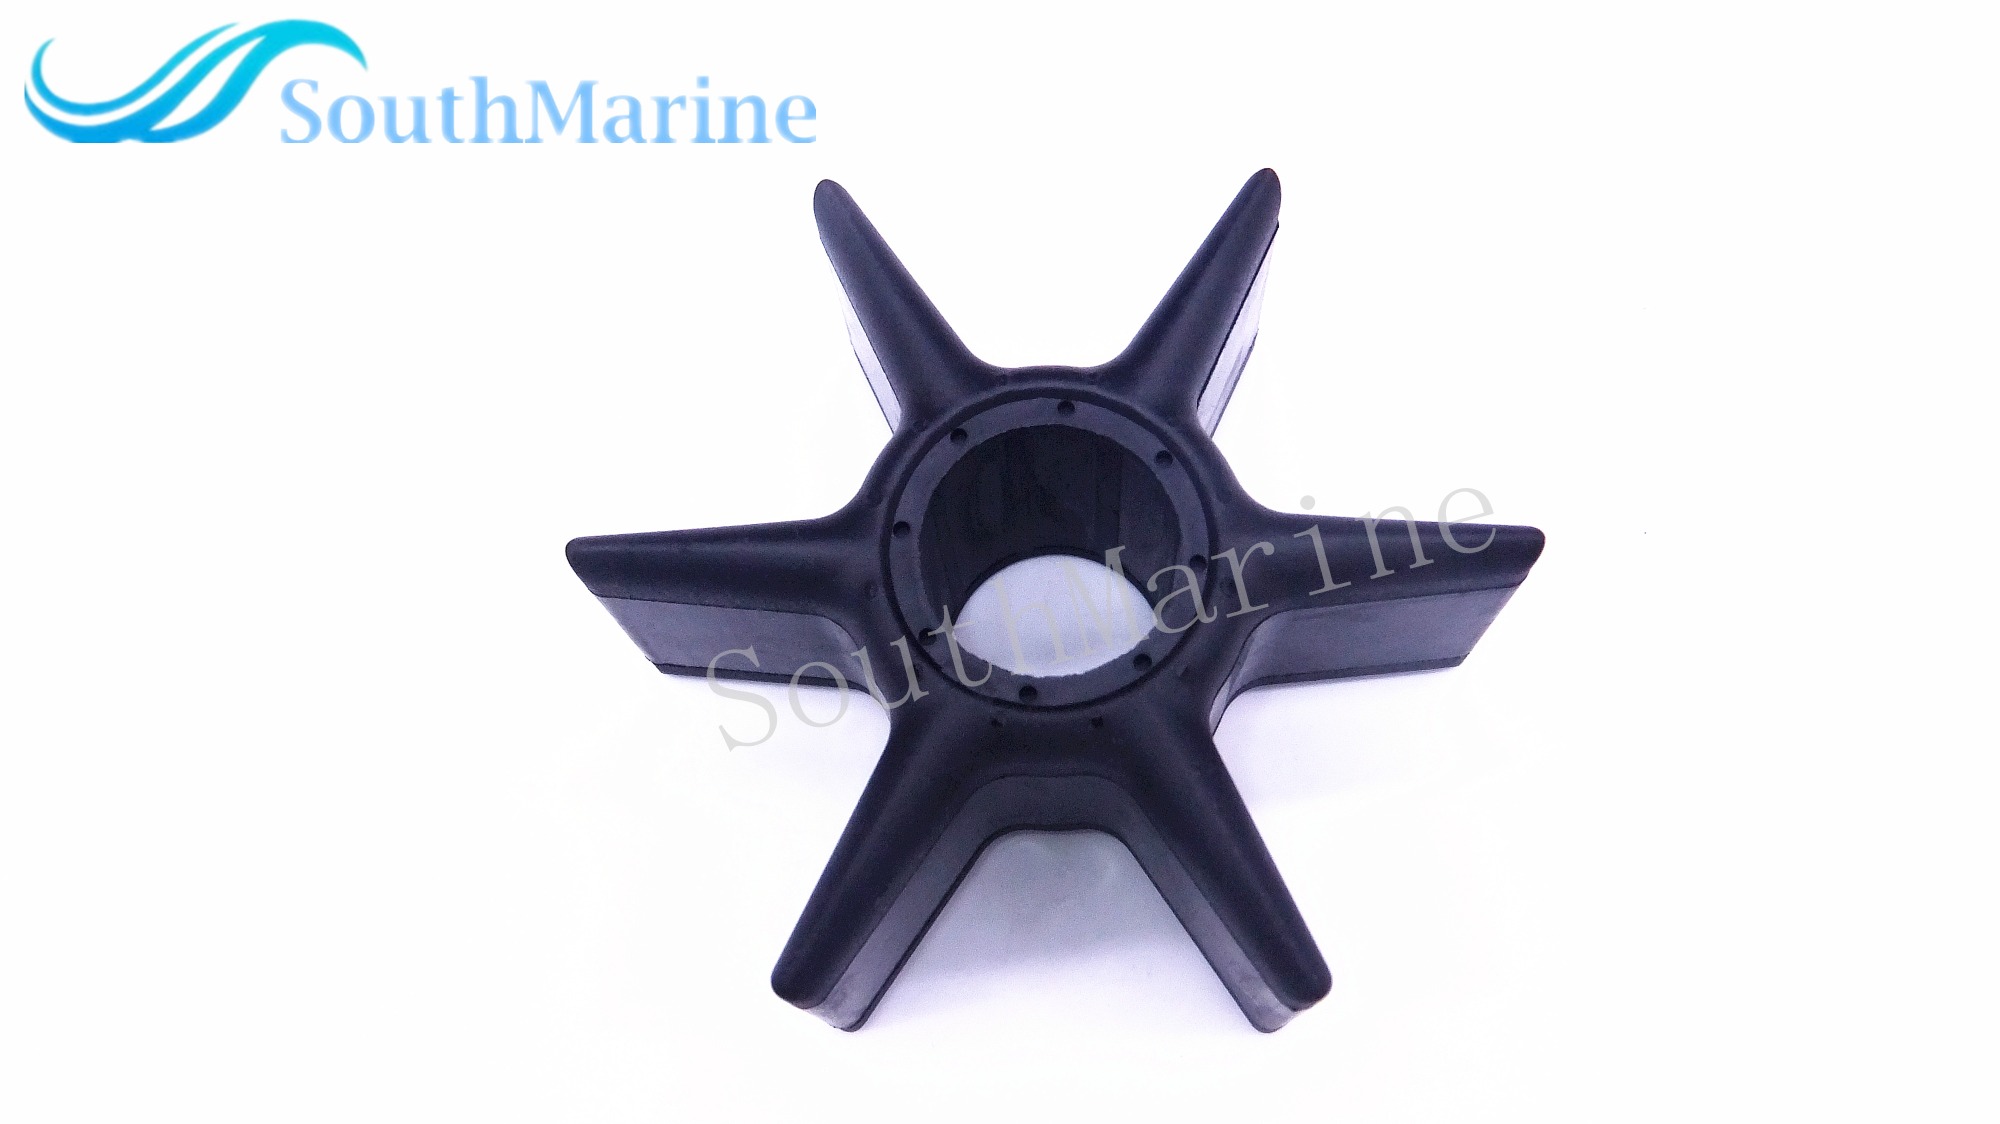 Southmarine Outboard Engine 6aw 44352 00 00 Water Pump Impeller For